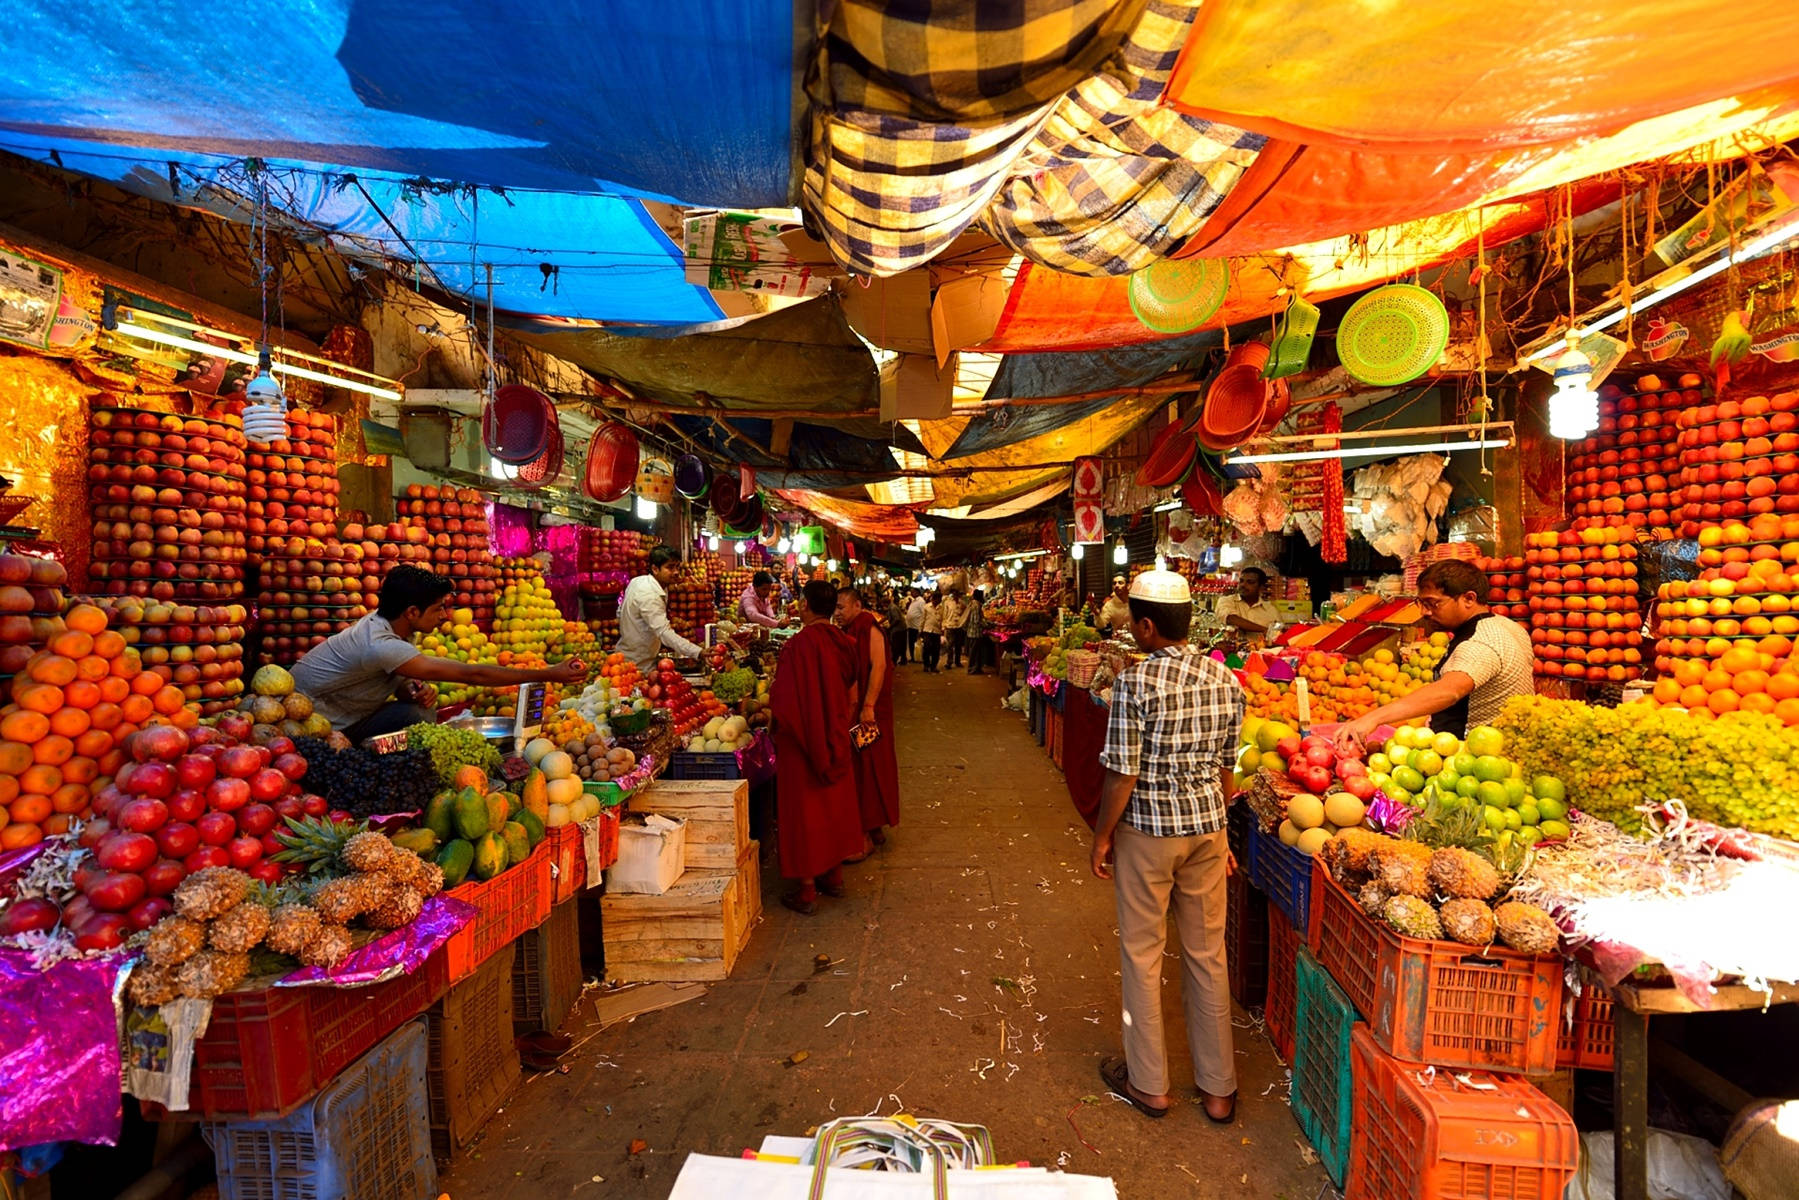 Fruits Market In India Wallpaper